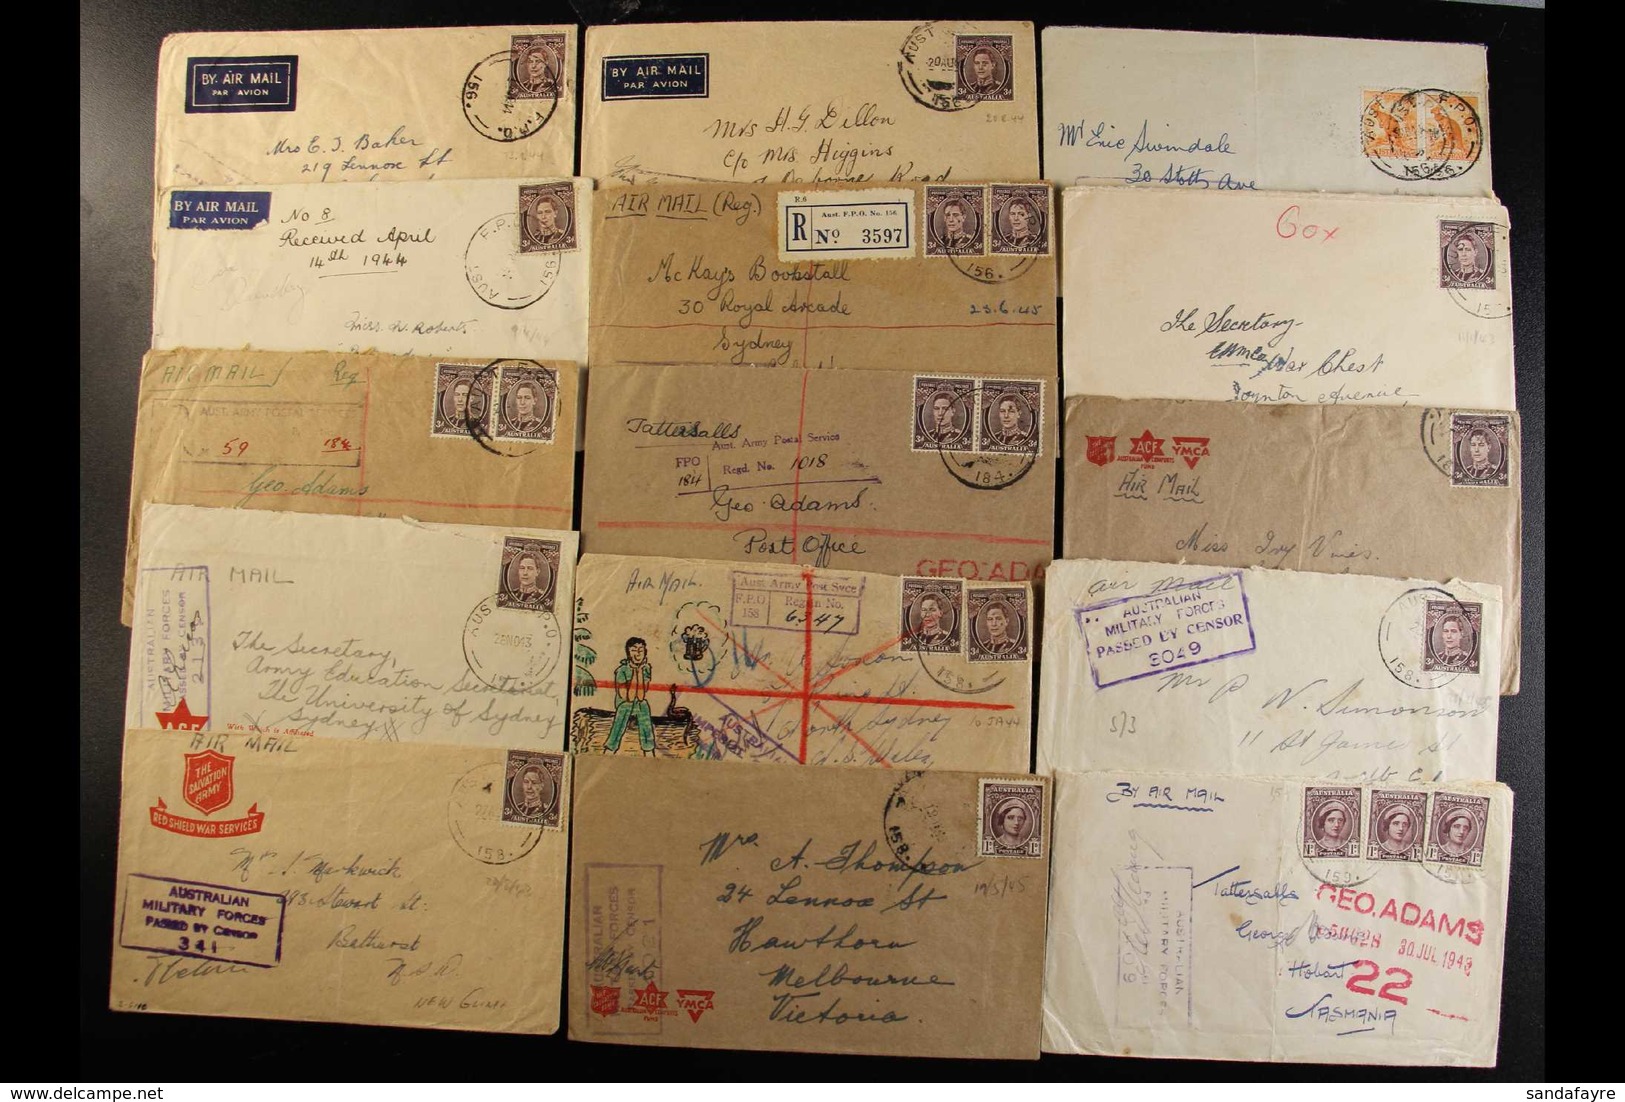 WW2 AUSTRALIAN FORCES - AUST F.P.O. DATESTAMPS  A Fine Collection Of Covers Back To Australia, Or One To NZ, Bearing Aus - Papoea-Nieuw-Guinea